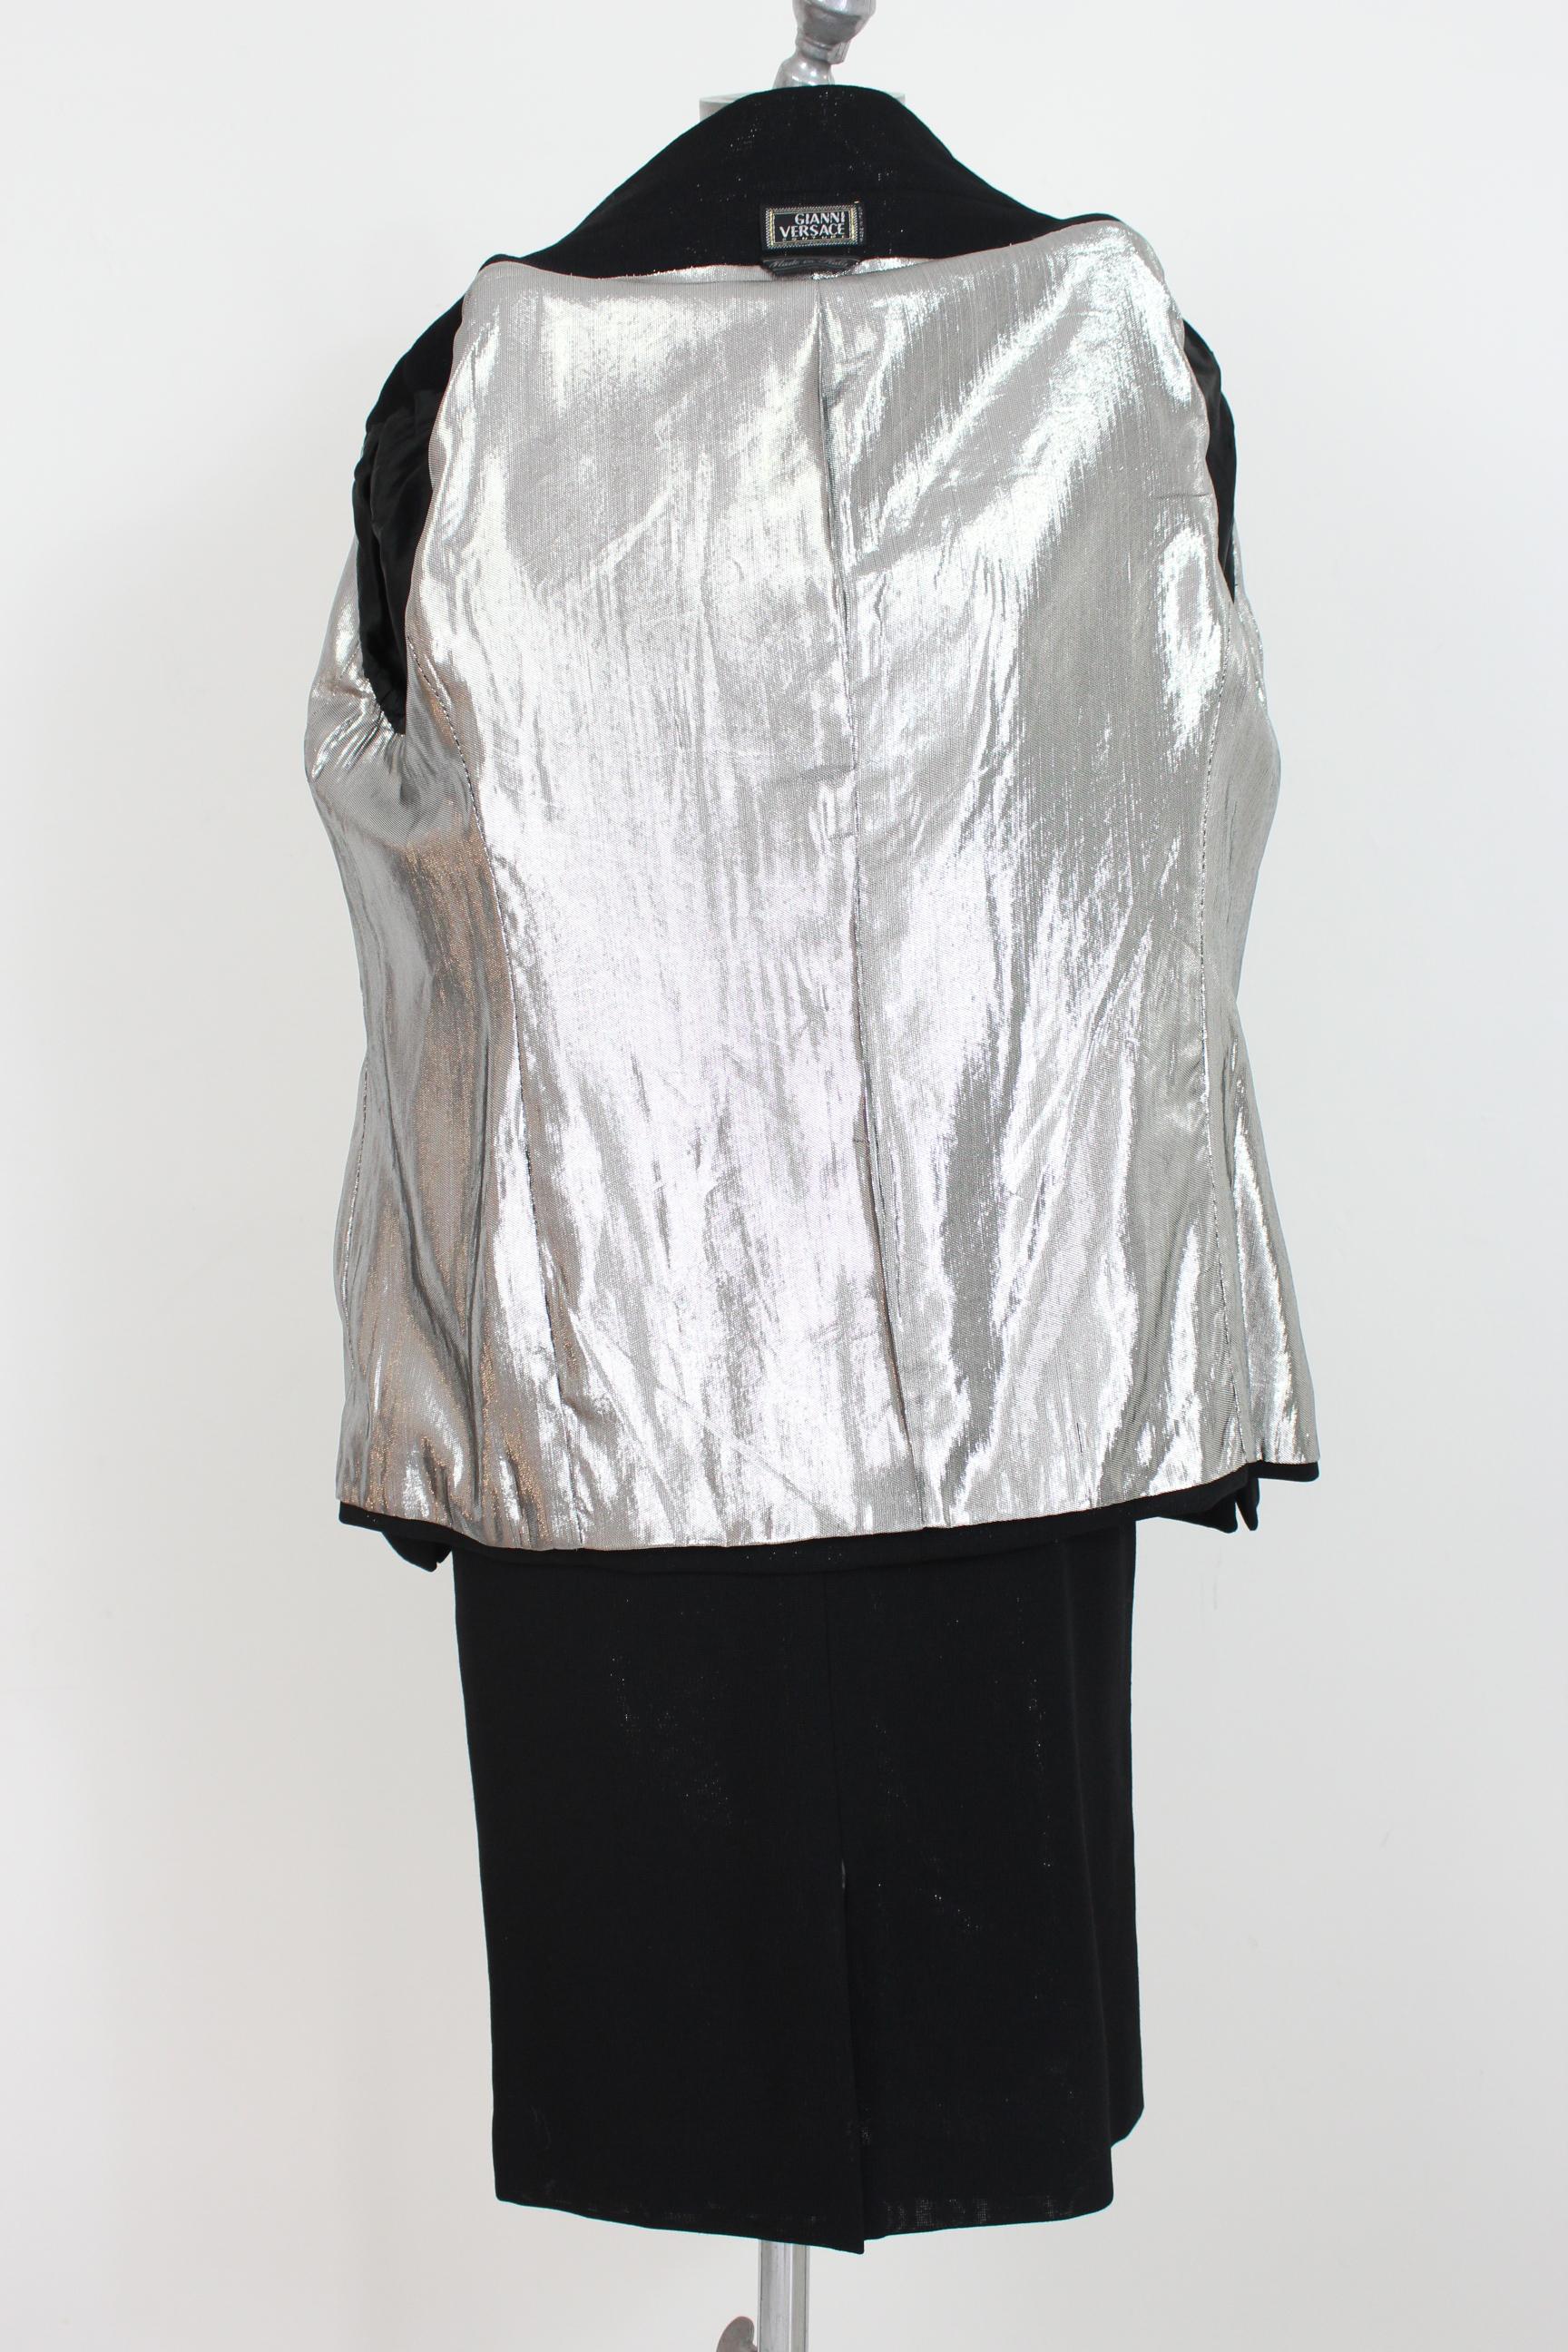 Women's Gianni Versace Couture Black Silver Silk Wool Lamè Evening Skirt Suit 1980s For Sale